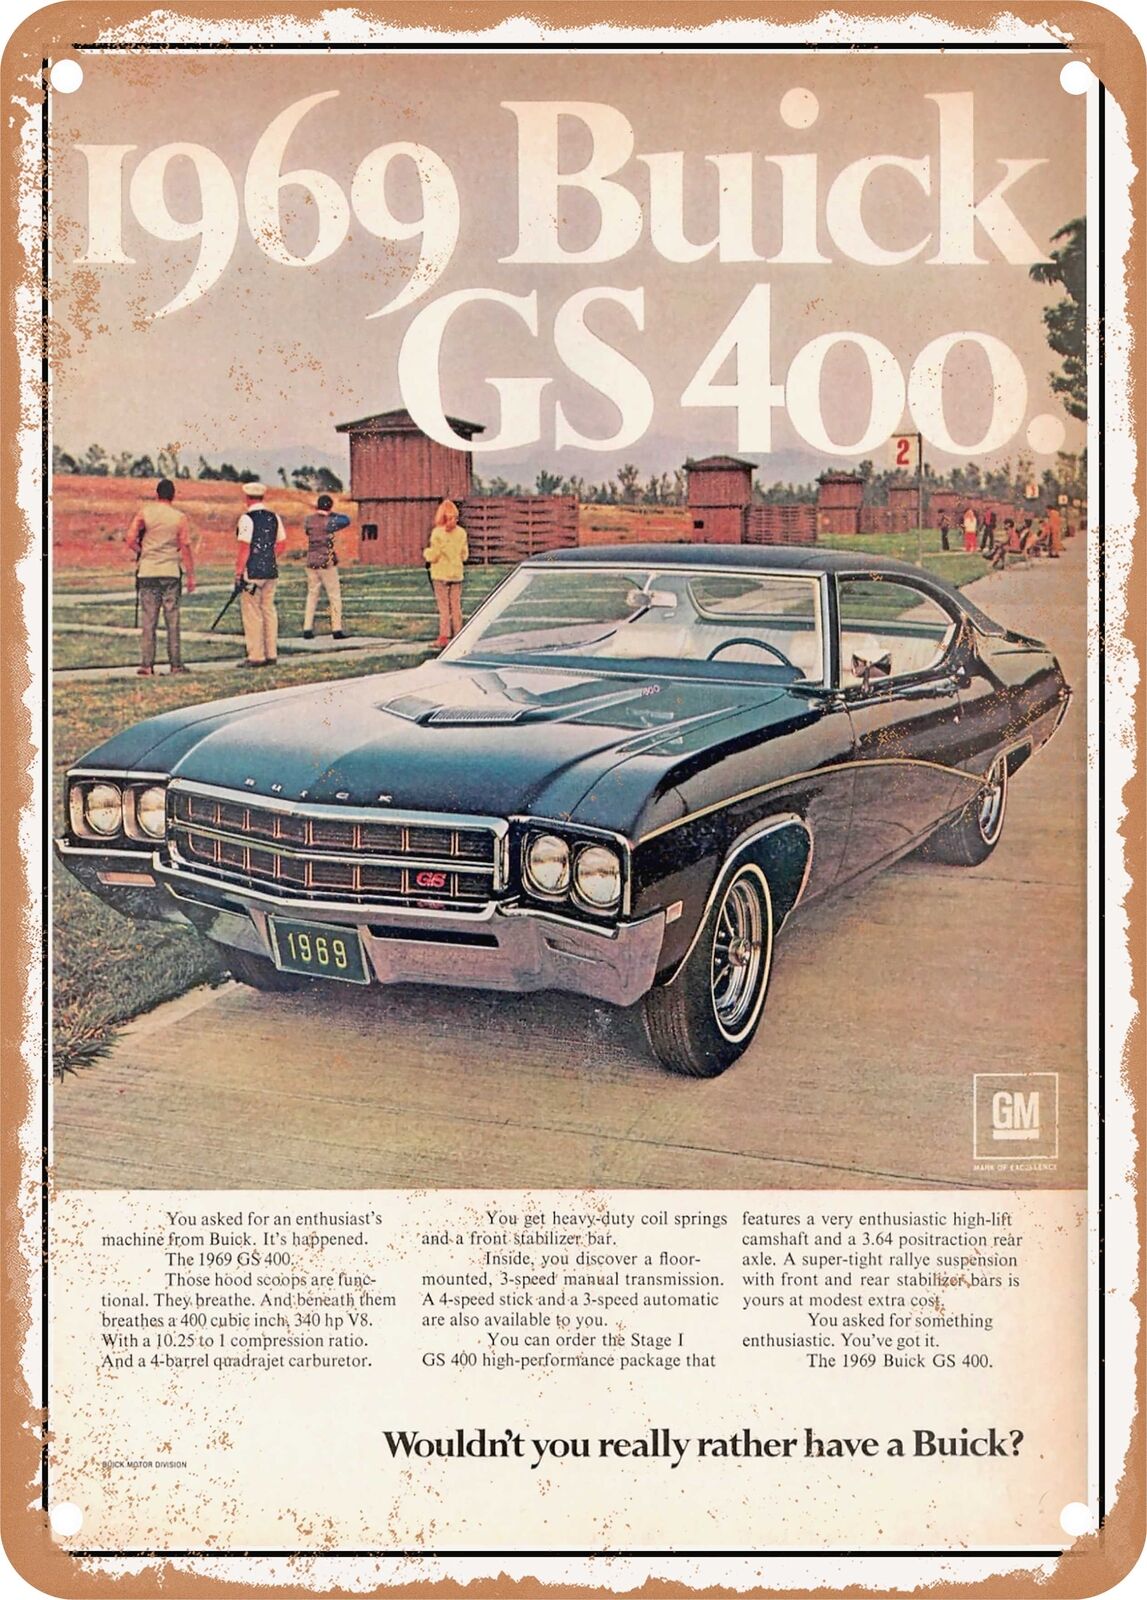 METAL SIGN - 1969 Buick GS 400 wouldn't You Really Rather Have a Buick